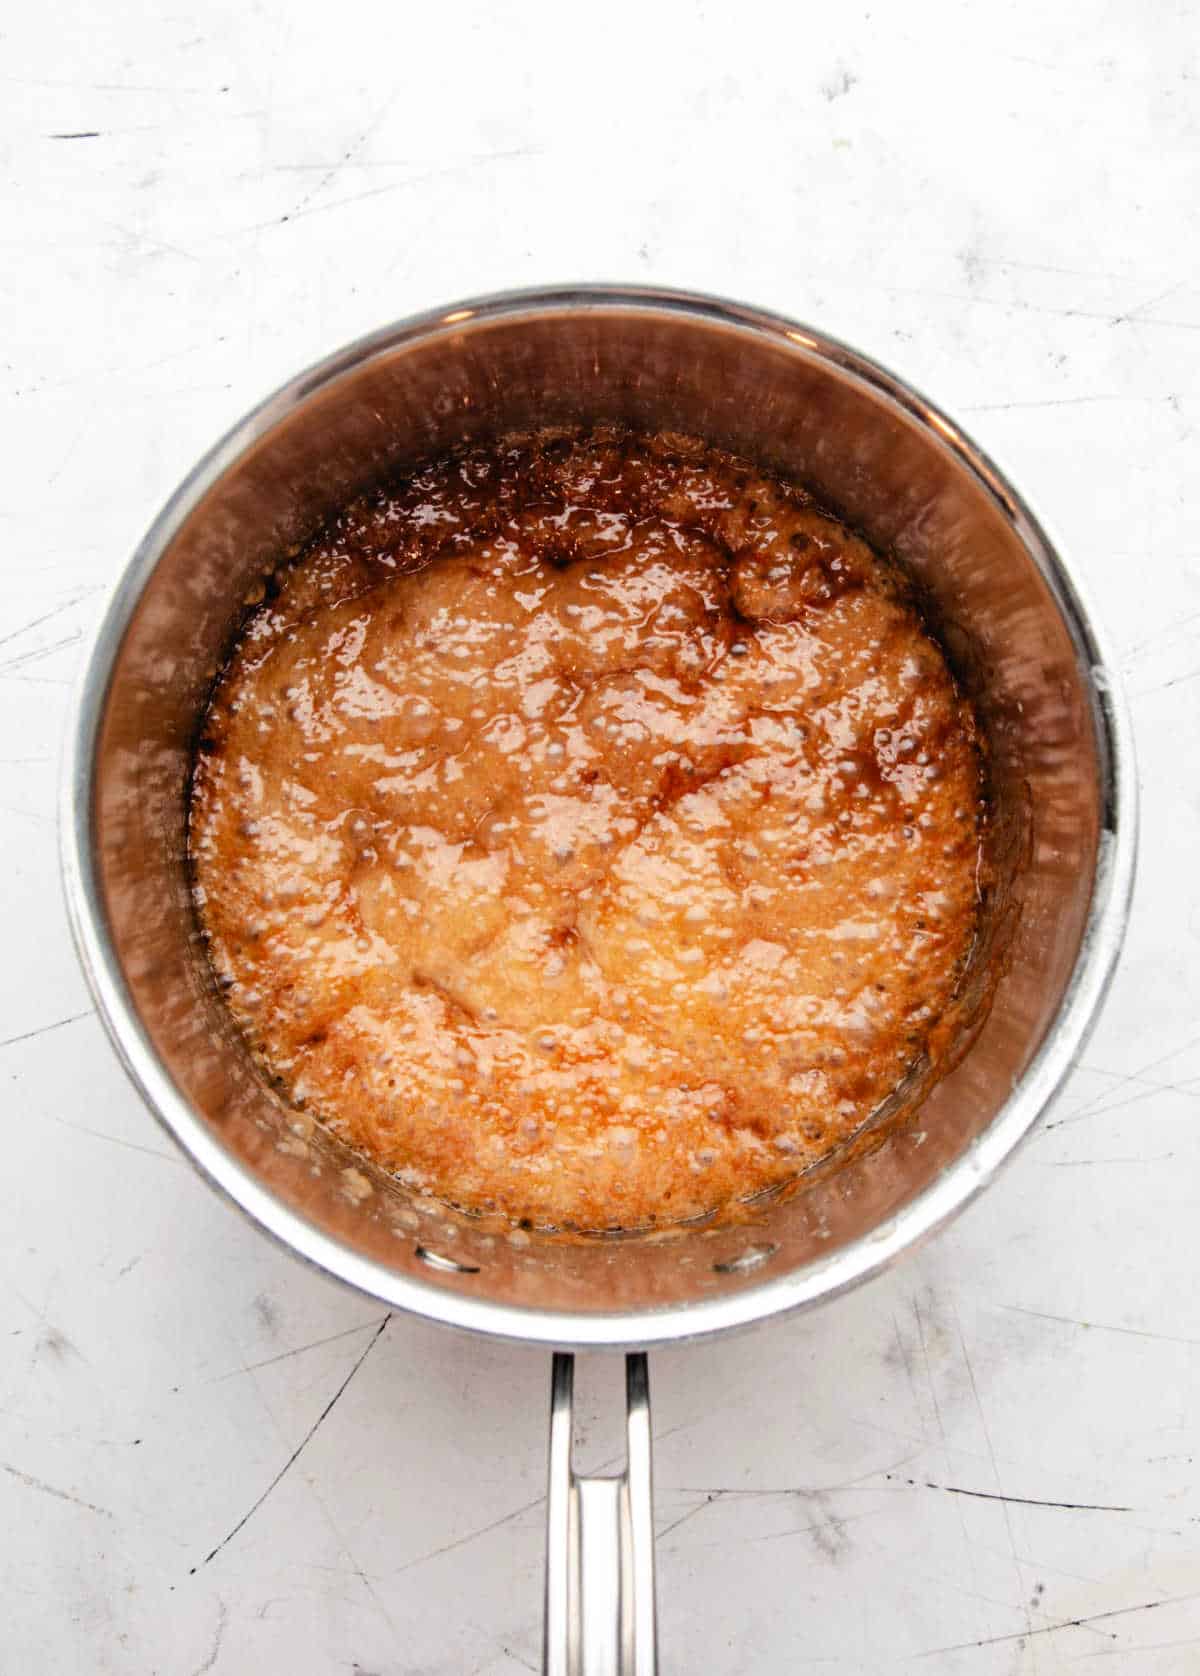 Boiling corn syrup and sugar mixture in a saucepan.